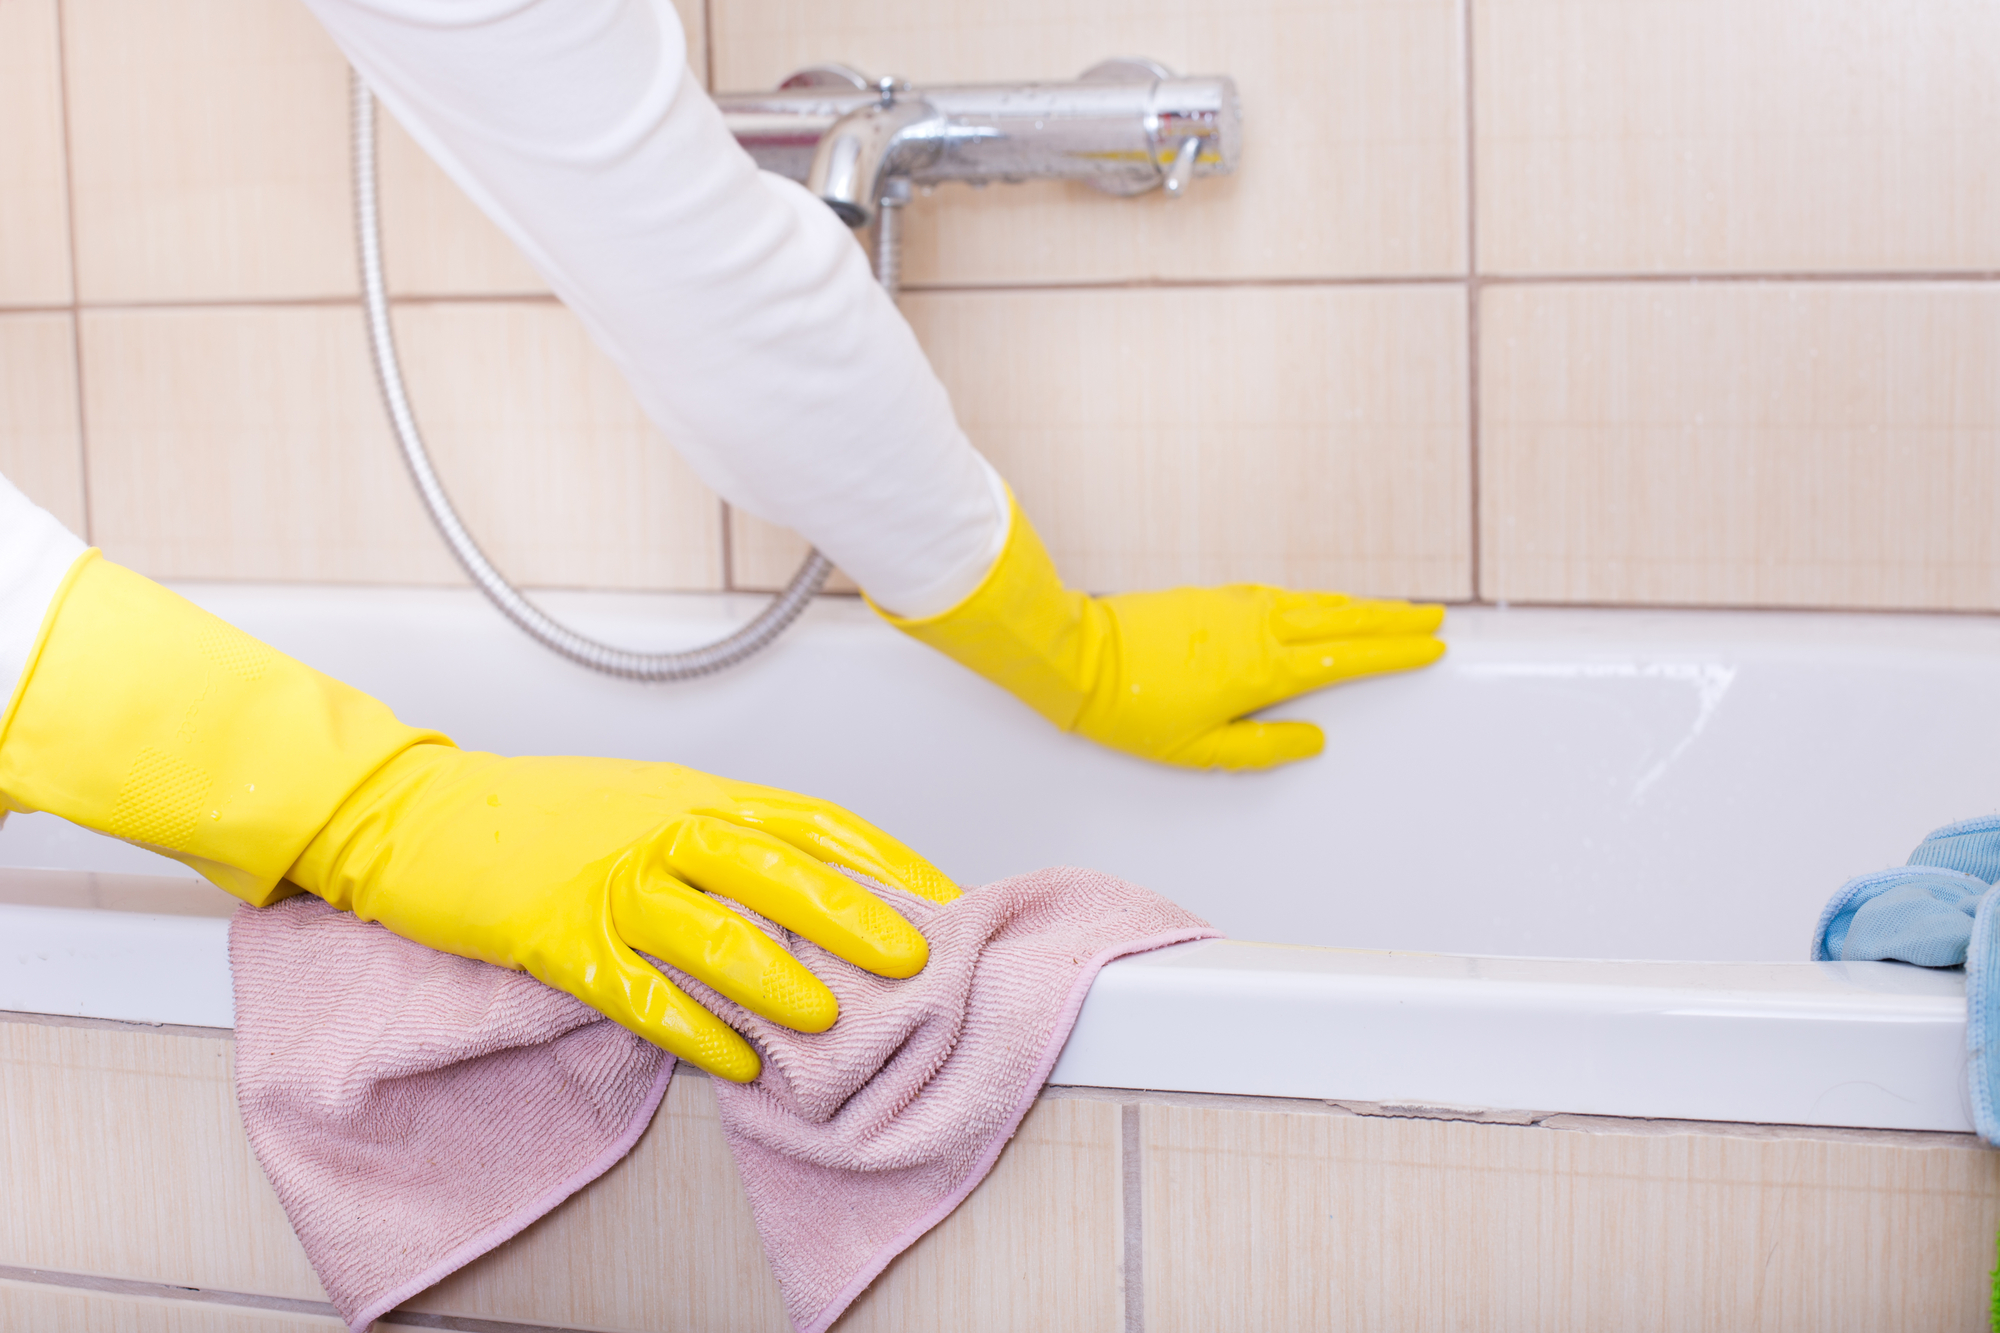 Easy Ways to Prevent Plumbing Emergencies at Home